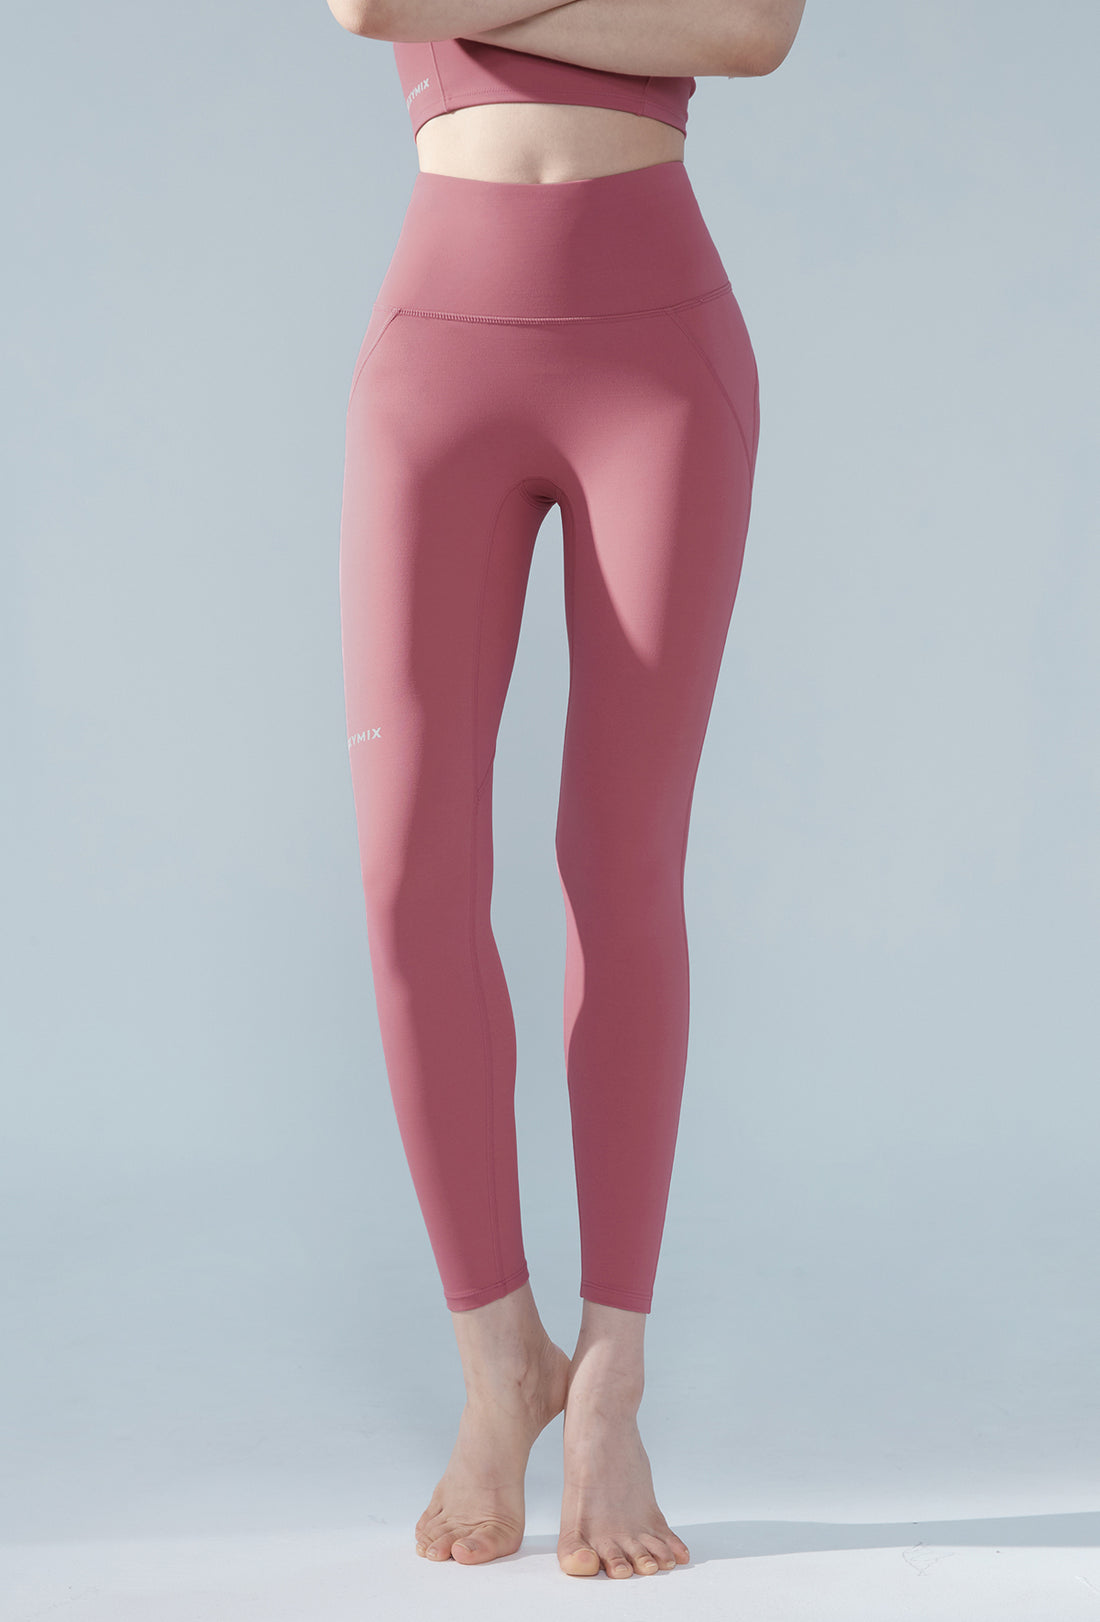 XEXYMIX Black Label Signature 380N Leggings - Holly Berry